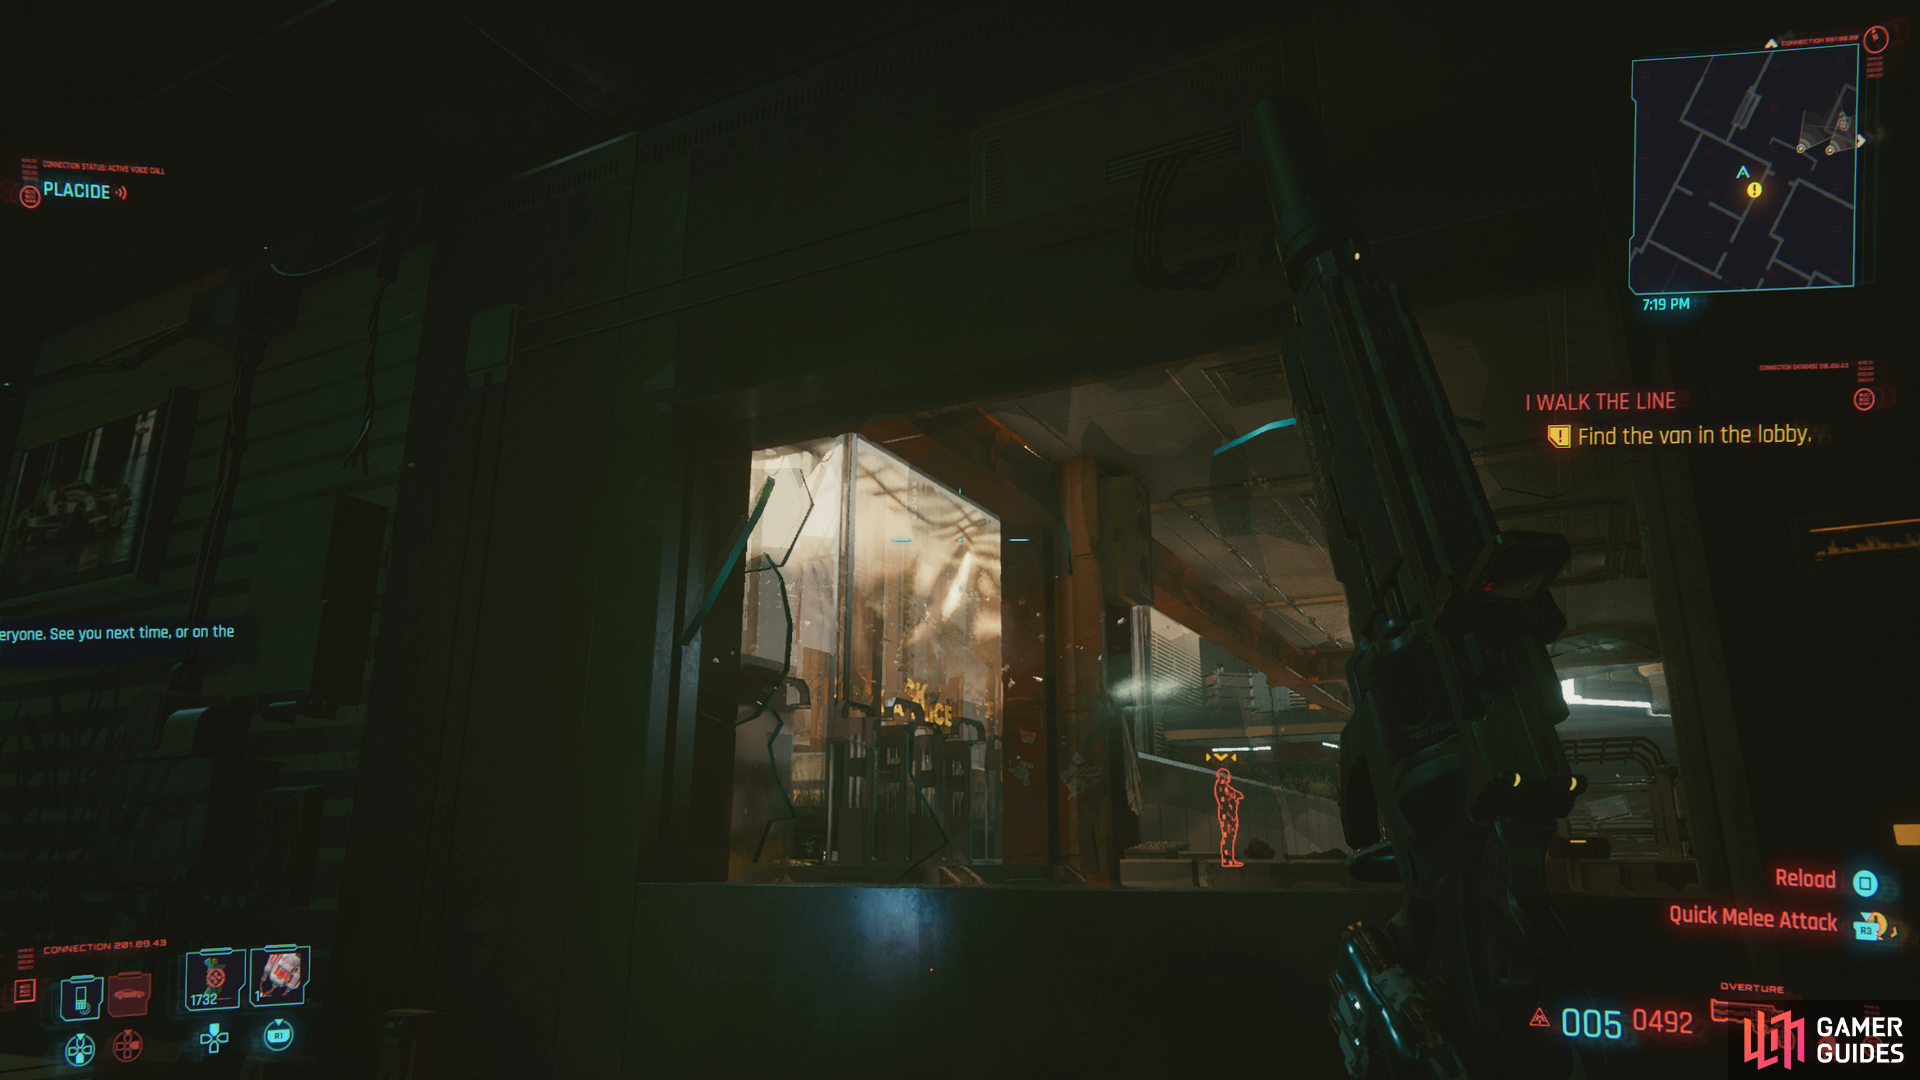 You can go through the door, or make your life a bit easier by shooting out a window with a silenced weapon.